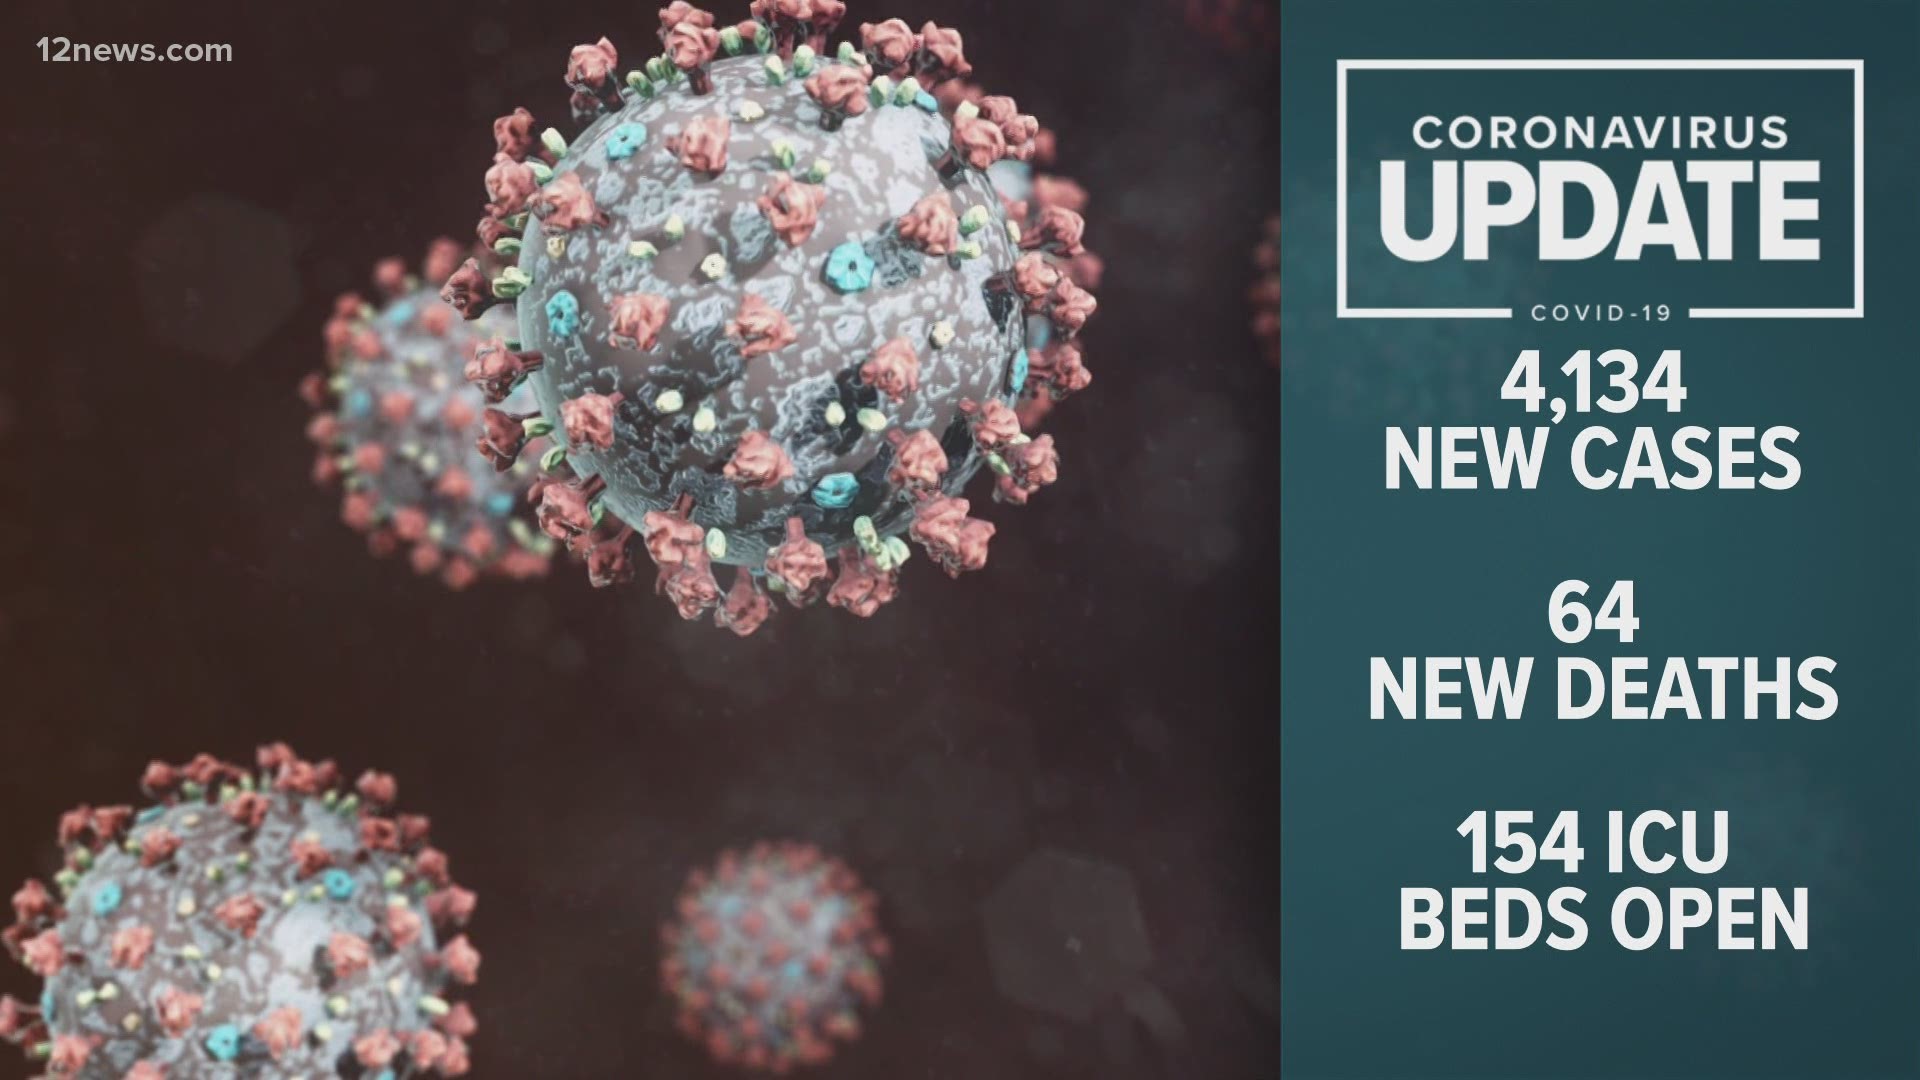 The number of coronavirus cases in Arizona continue to increase. Tram Mai has the update for Dec. 15, 2020.